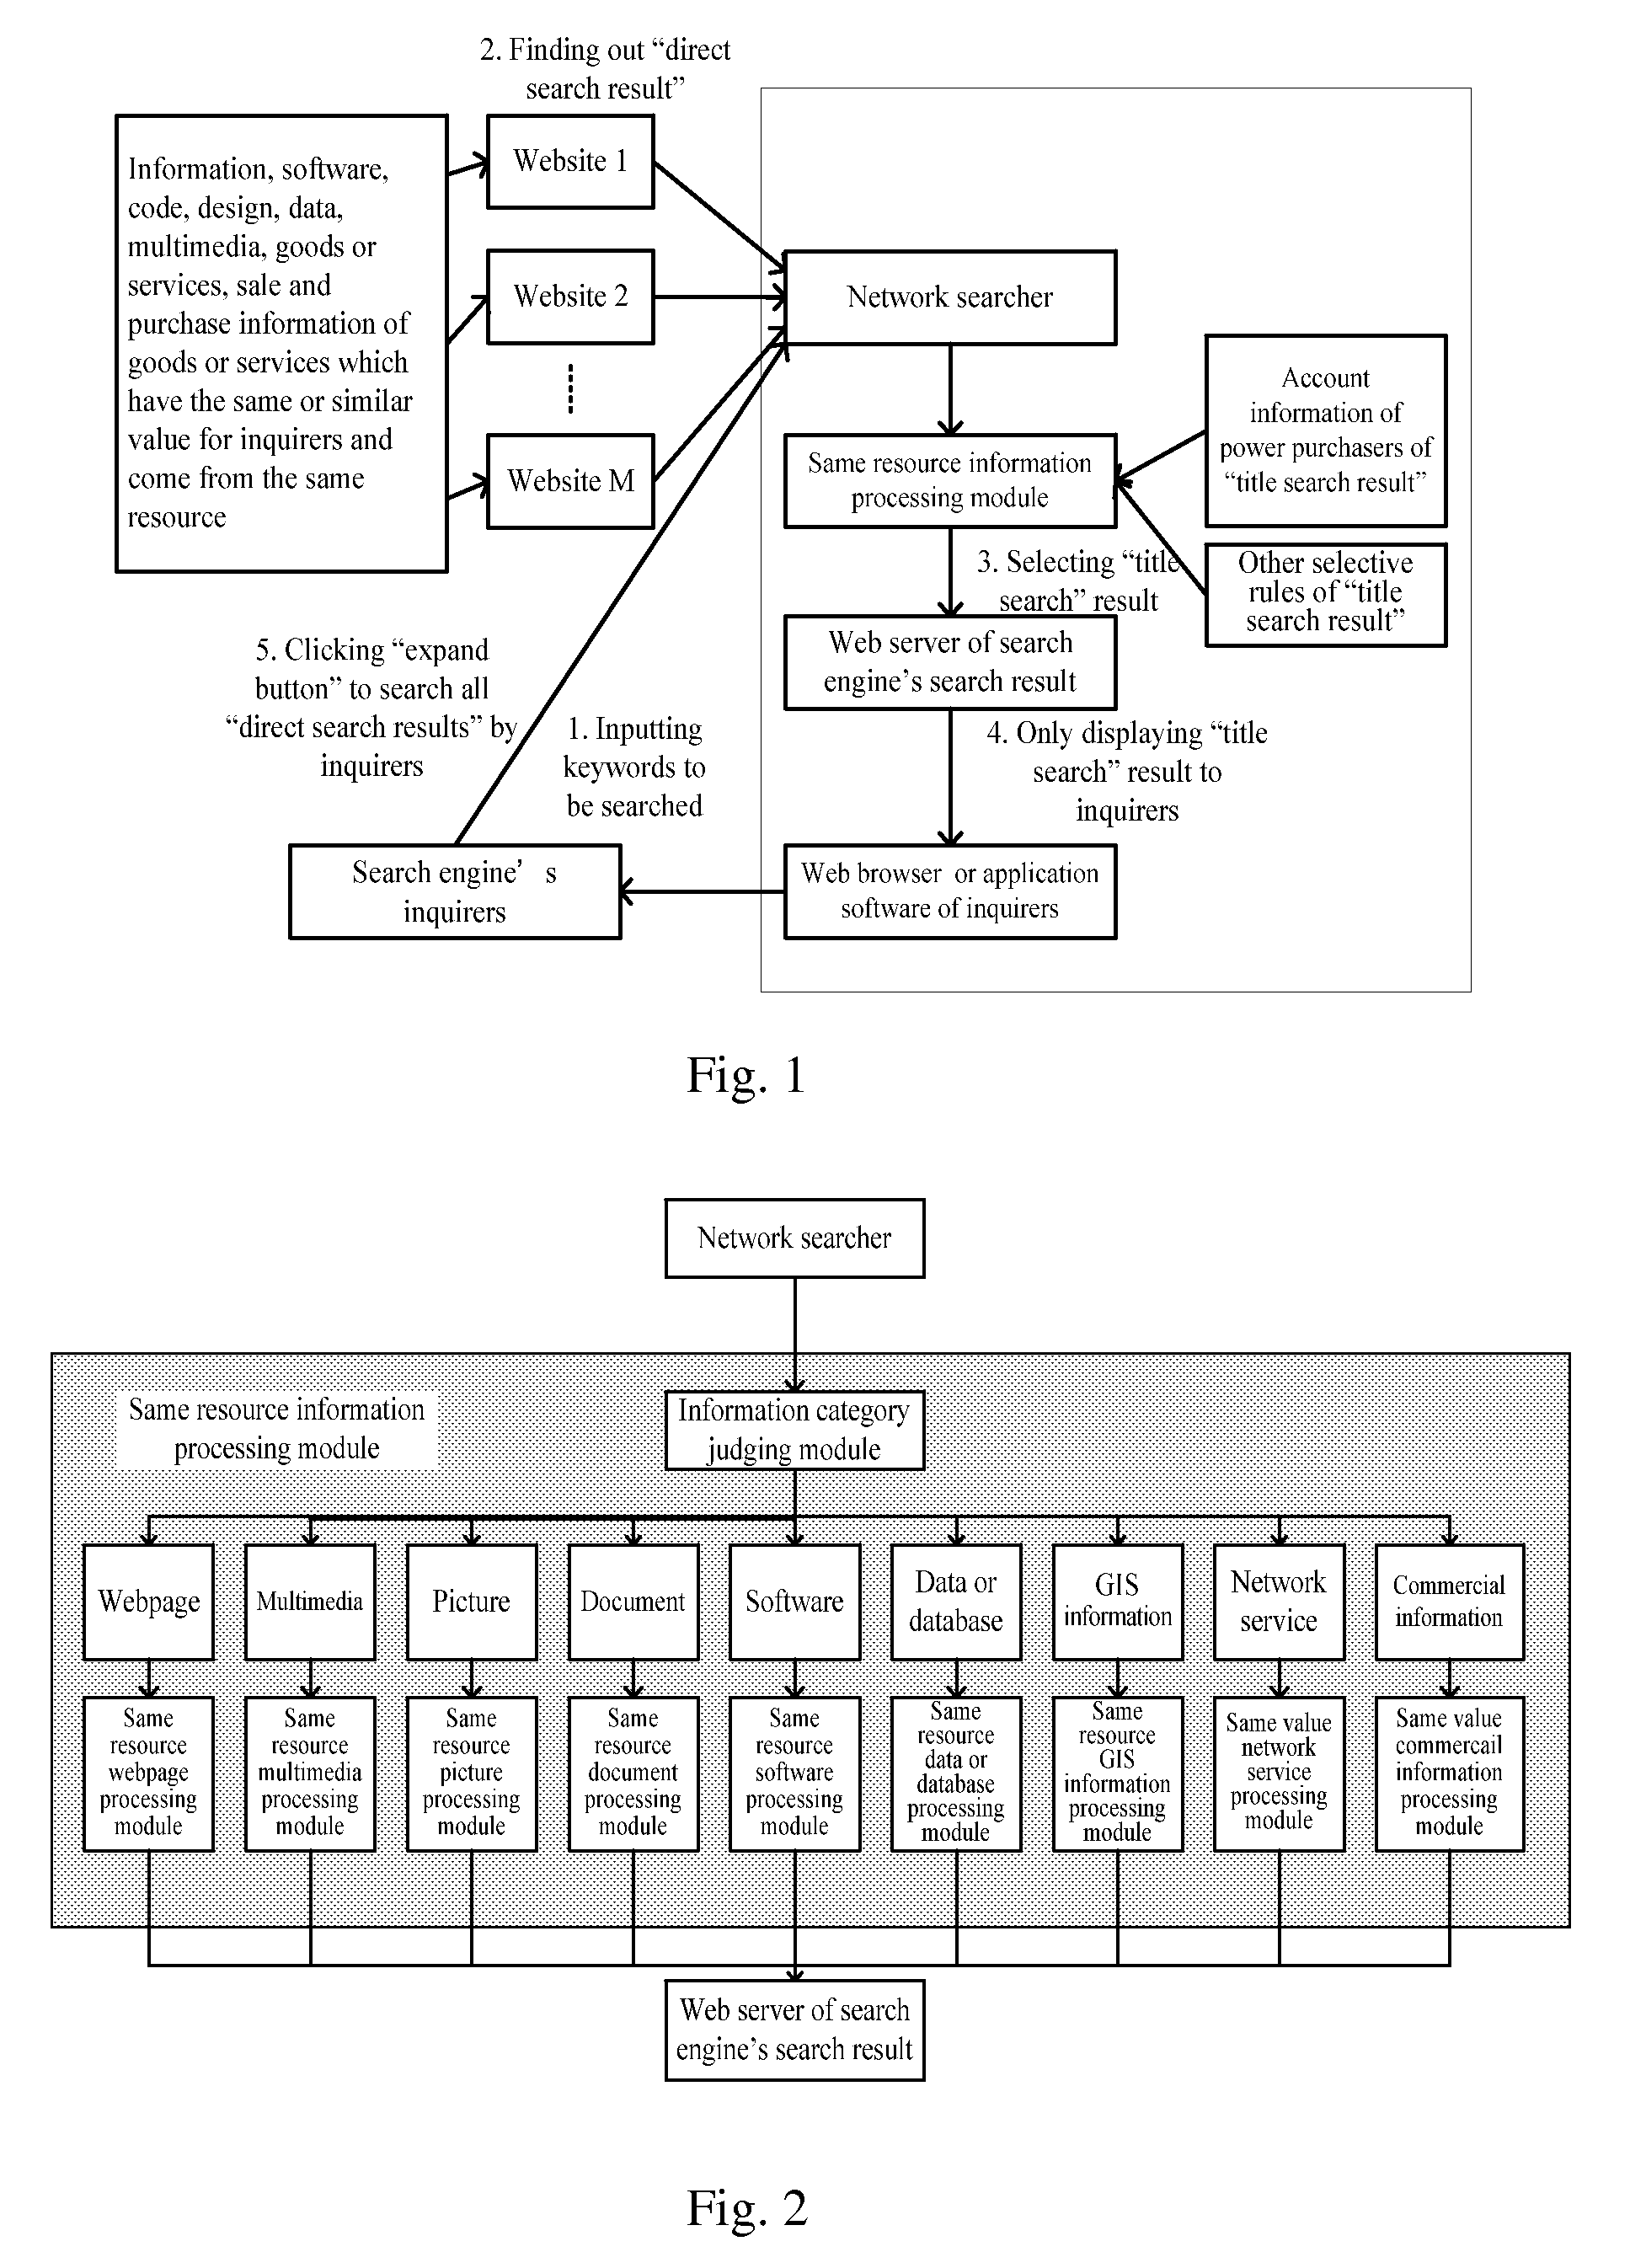 Composite display method and system for search engine of same resource information based on degree of attention